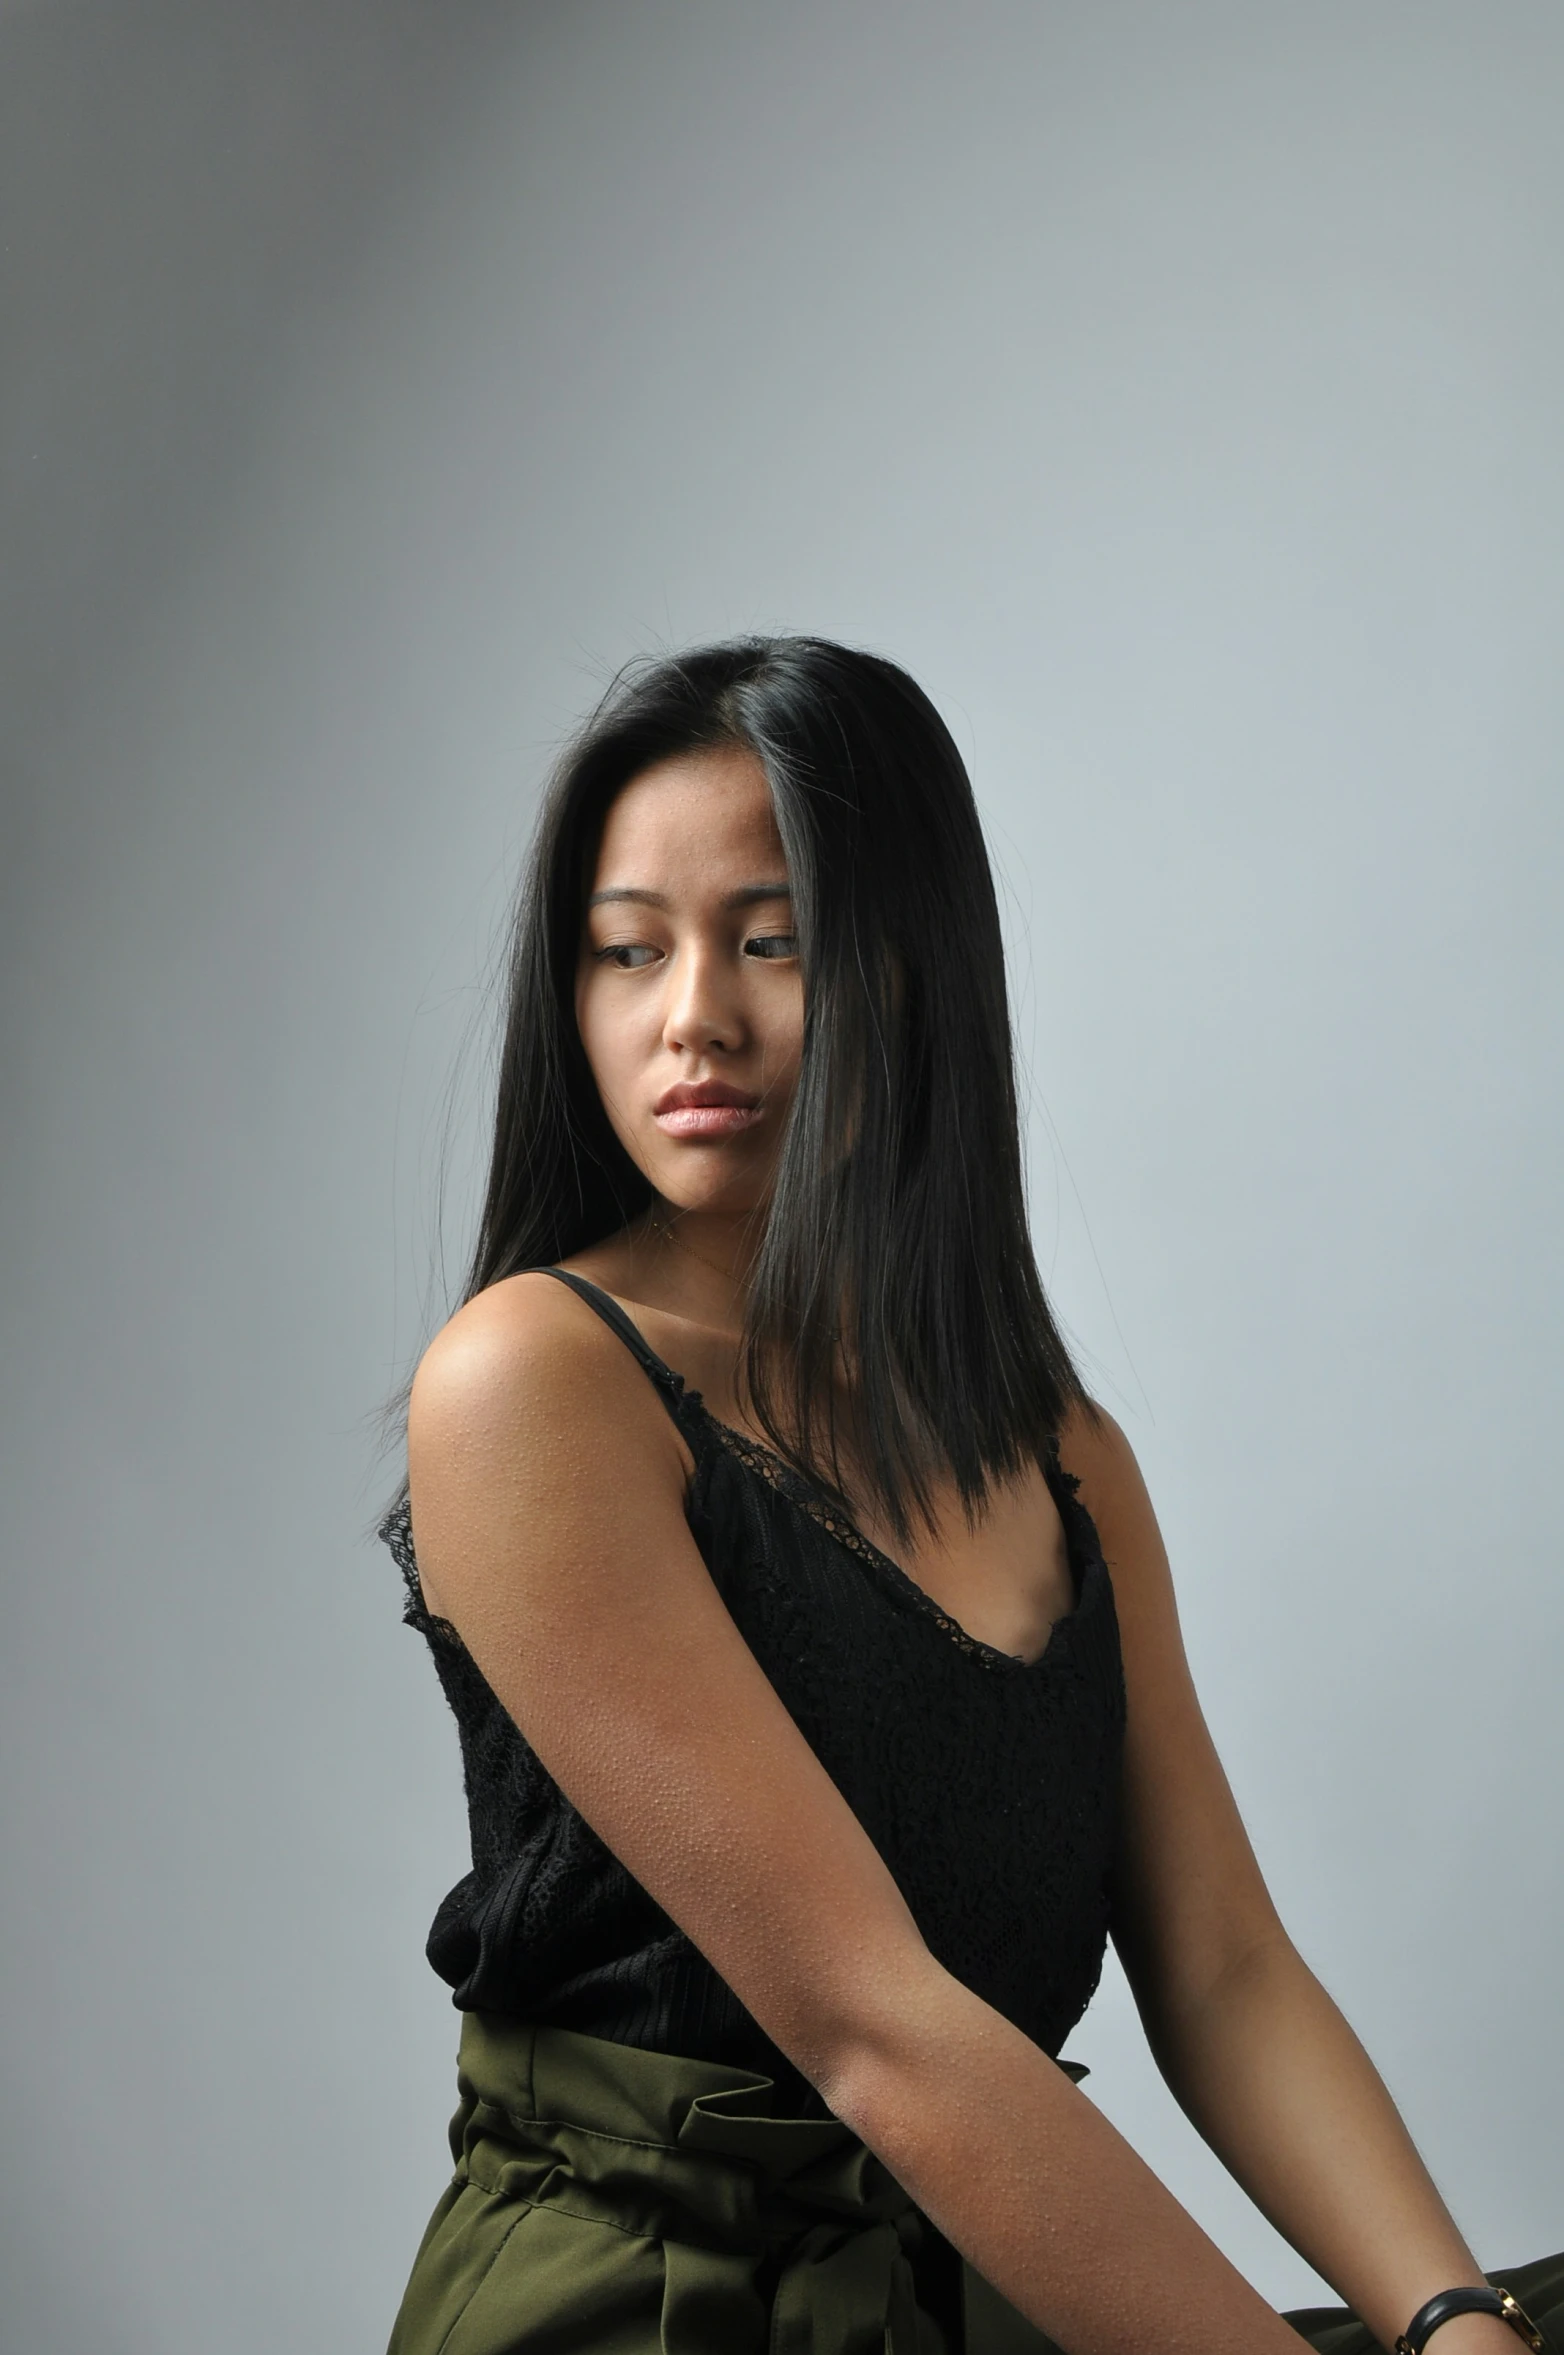 an asian woman sitting on a stool wearing her black shirt and green shorts